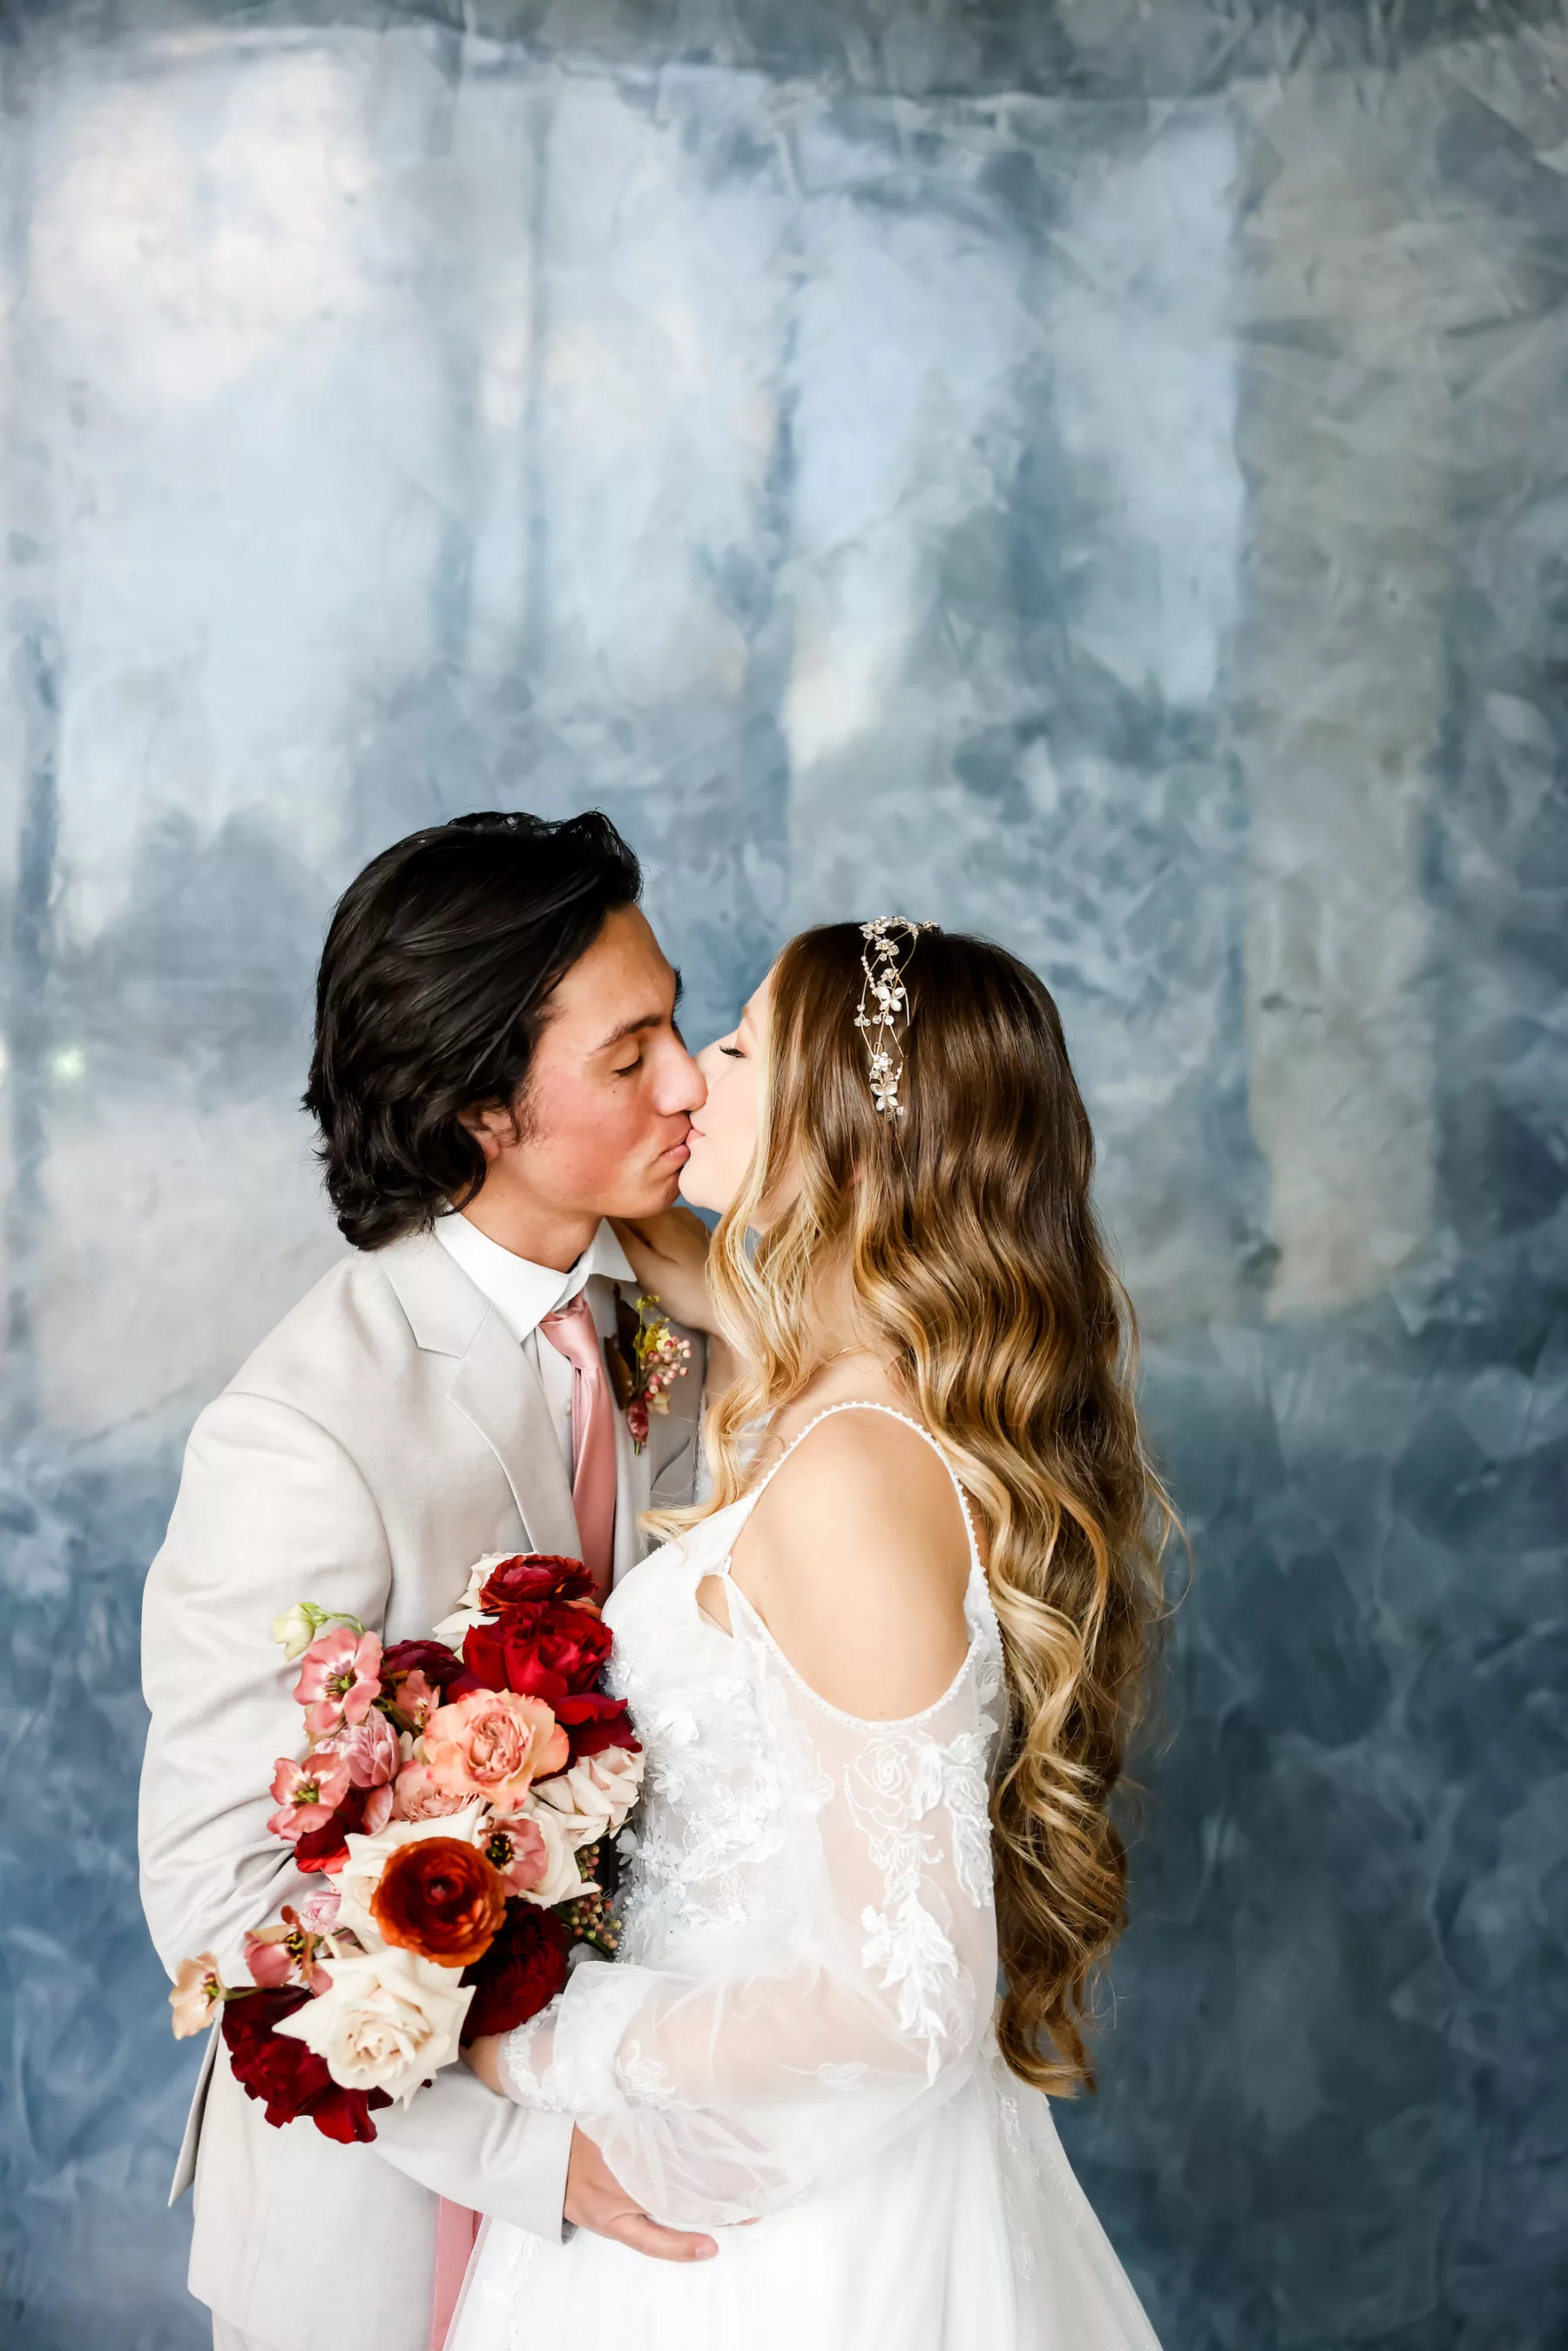 Bride and Groom First Look Wedding Portrait | Tampa Bay Photographer Lifelong Photography Studio | Hair and Makeup Artist Adore Bridal Services